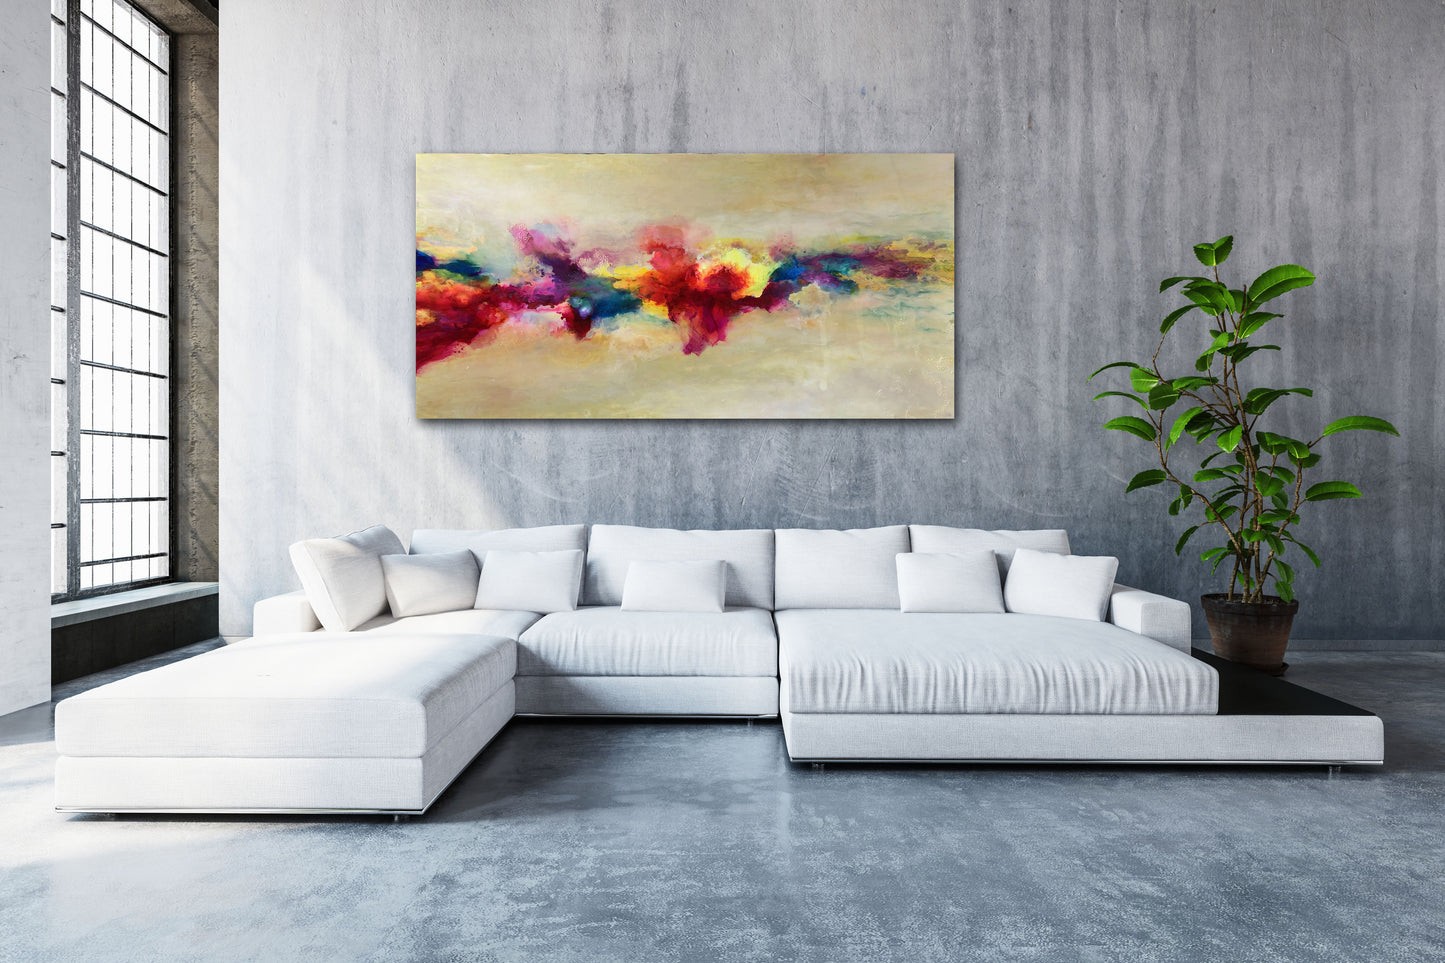 Hues to You! 36" X 72" - SOLD